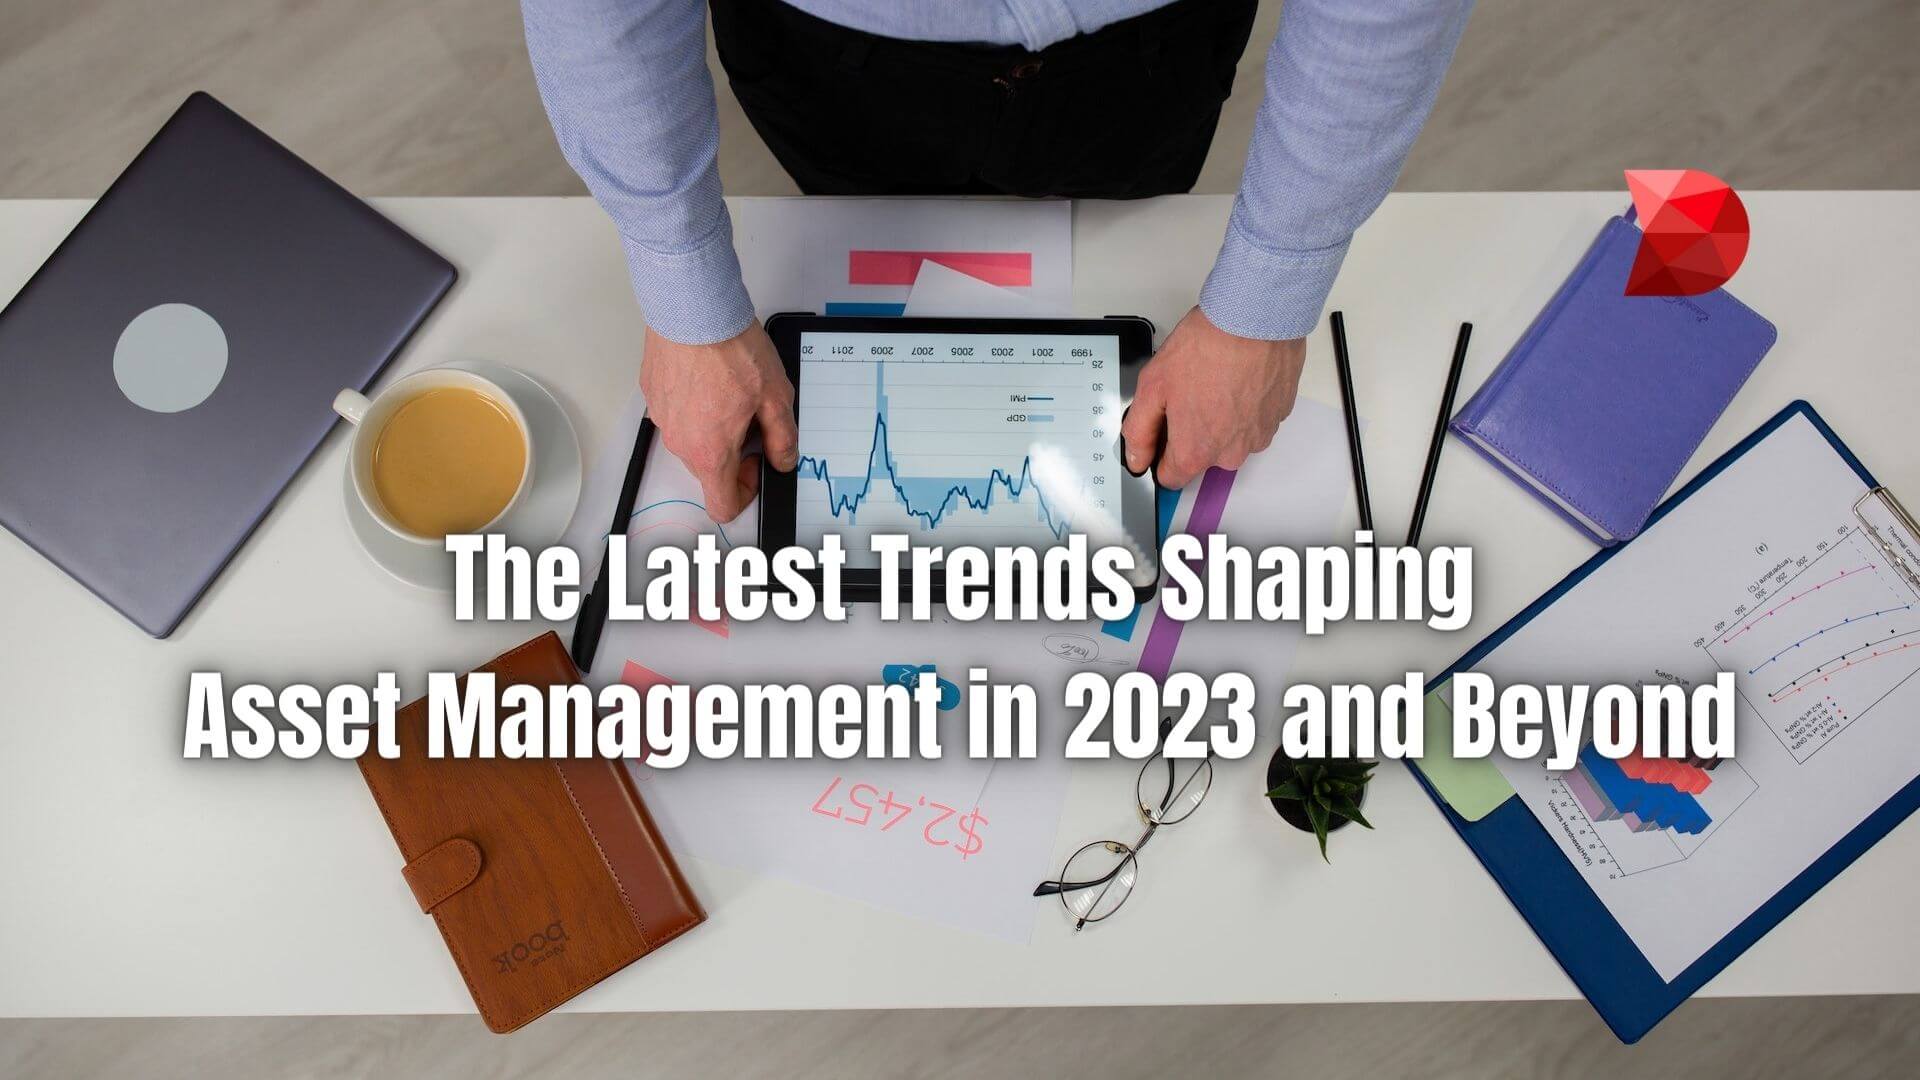 Being aware of emerging asset management trends and adapting swiftly is no longer optional but necessary. Click here to learn why!